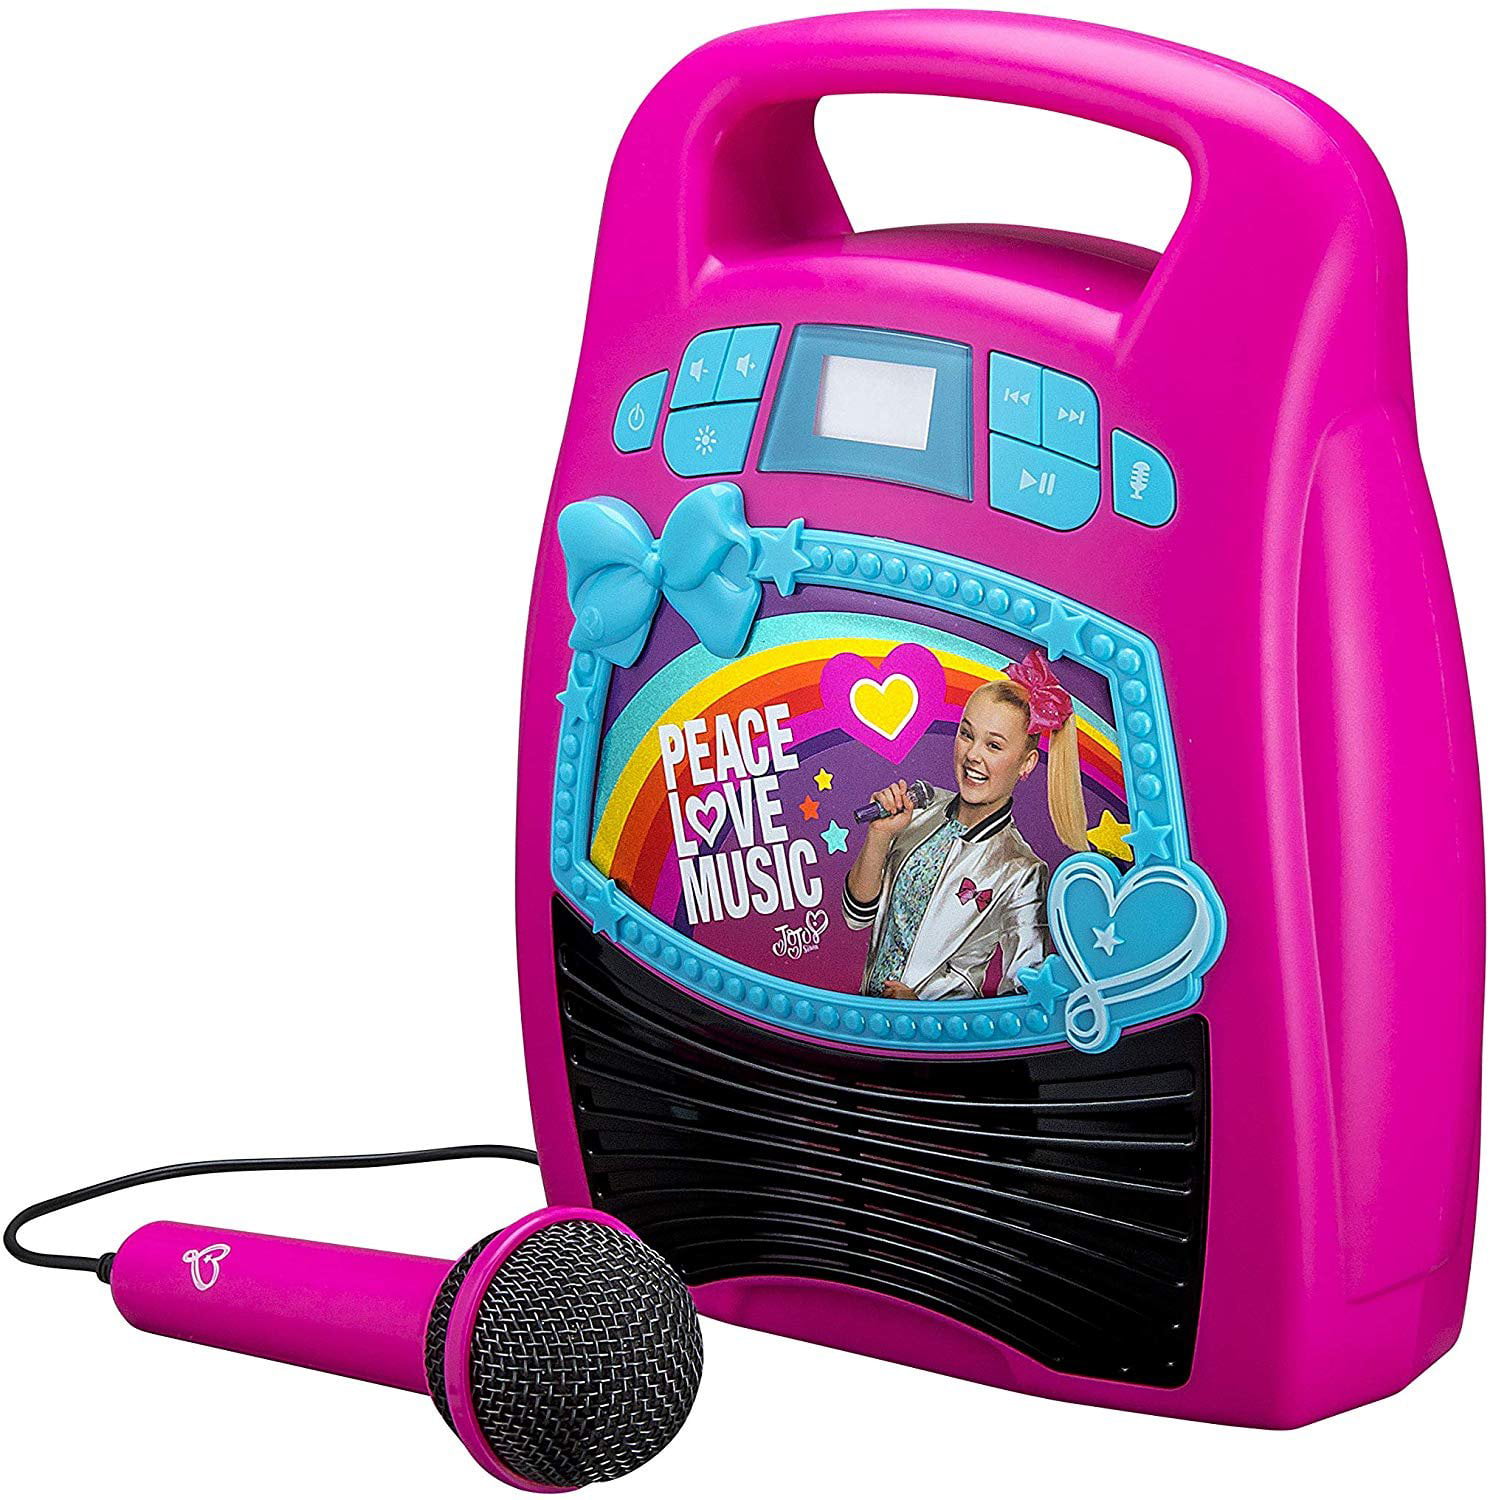 eKids JoJo Siwa Bluetooth Portable MP3 Karaoke Machine Player Light Show Store Hours of Music Built in Memory Sing Along Using Real Working Microphone USB Port Expand Content 